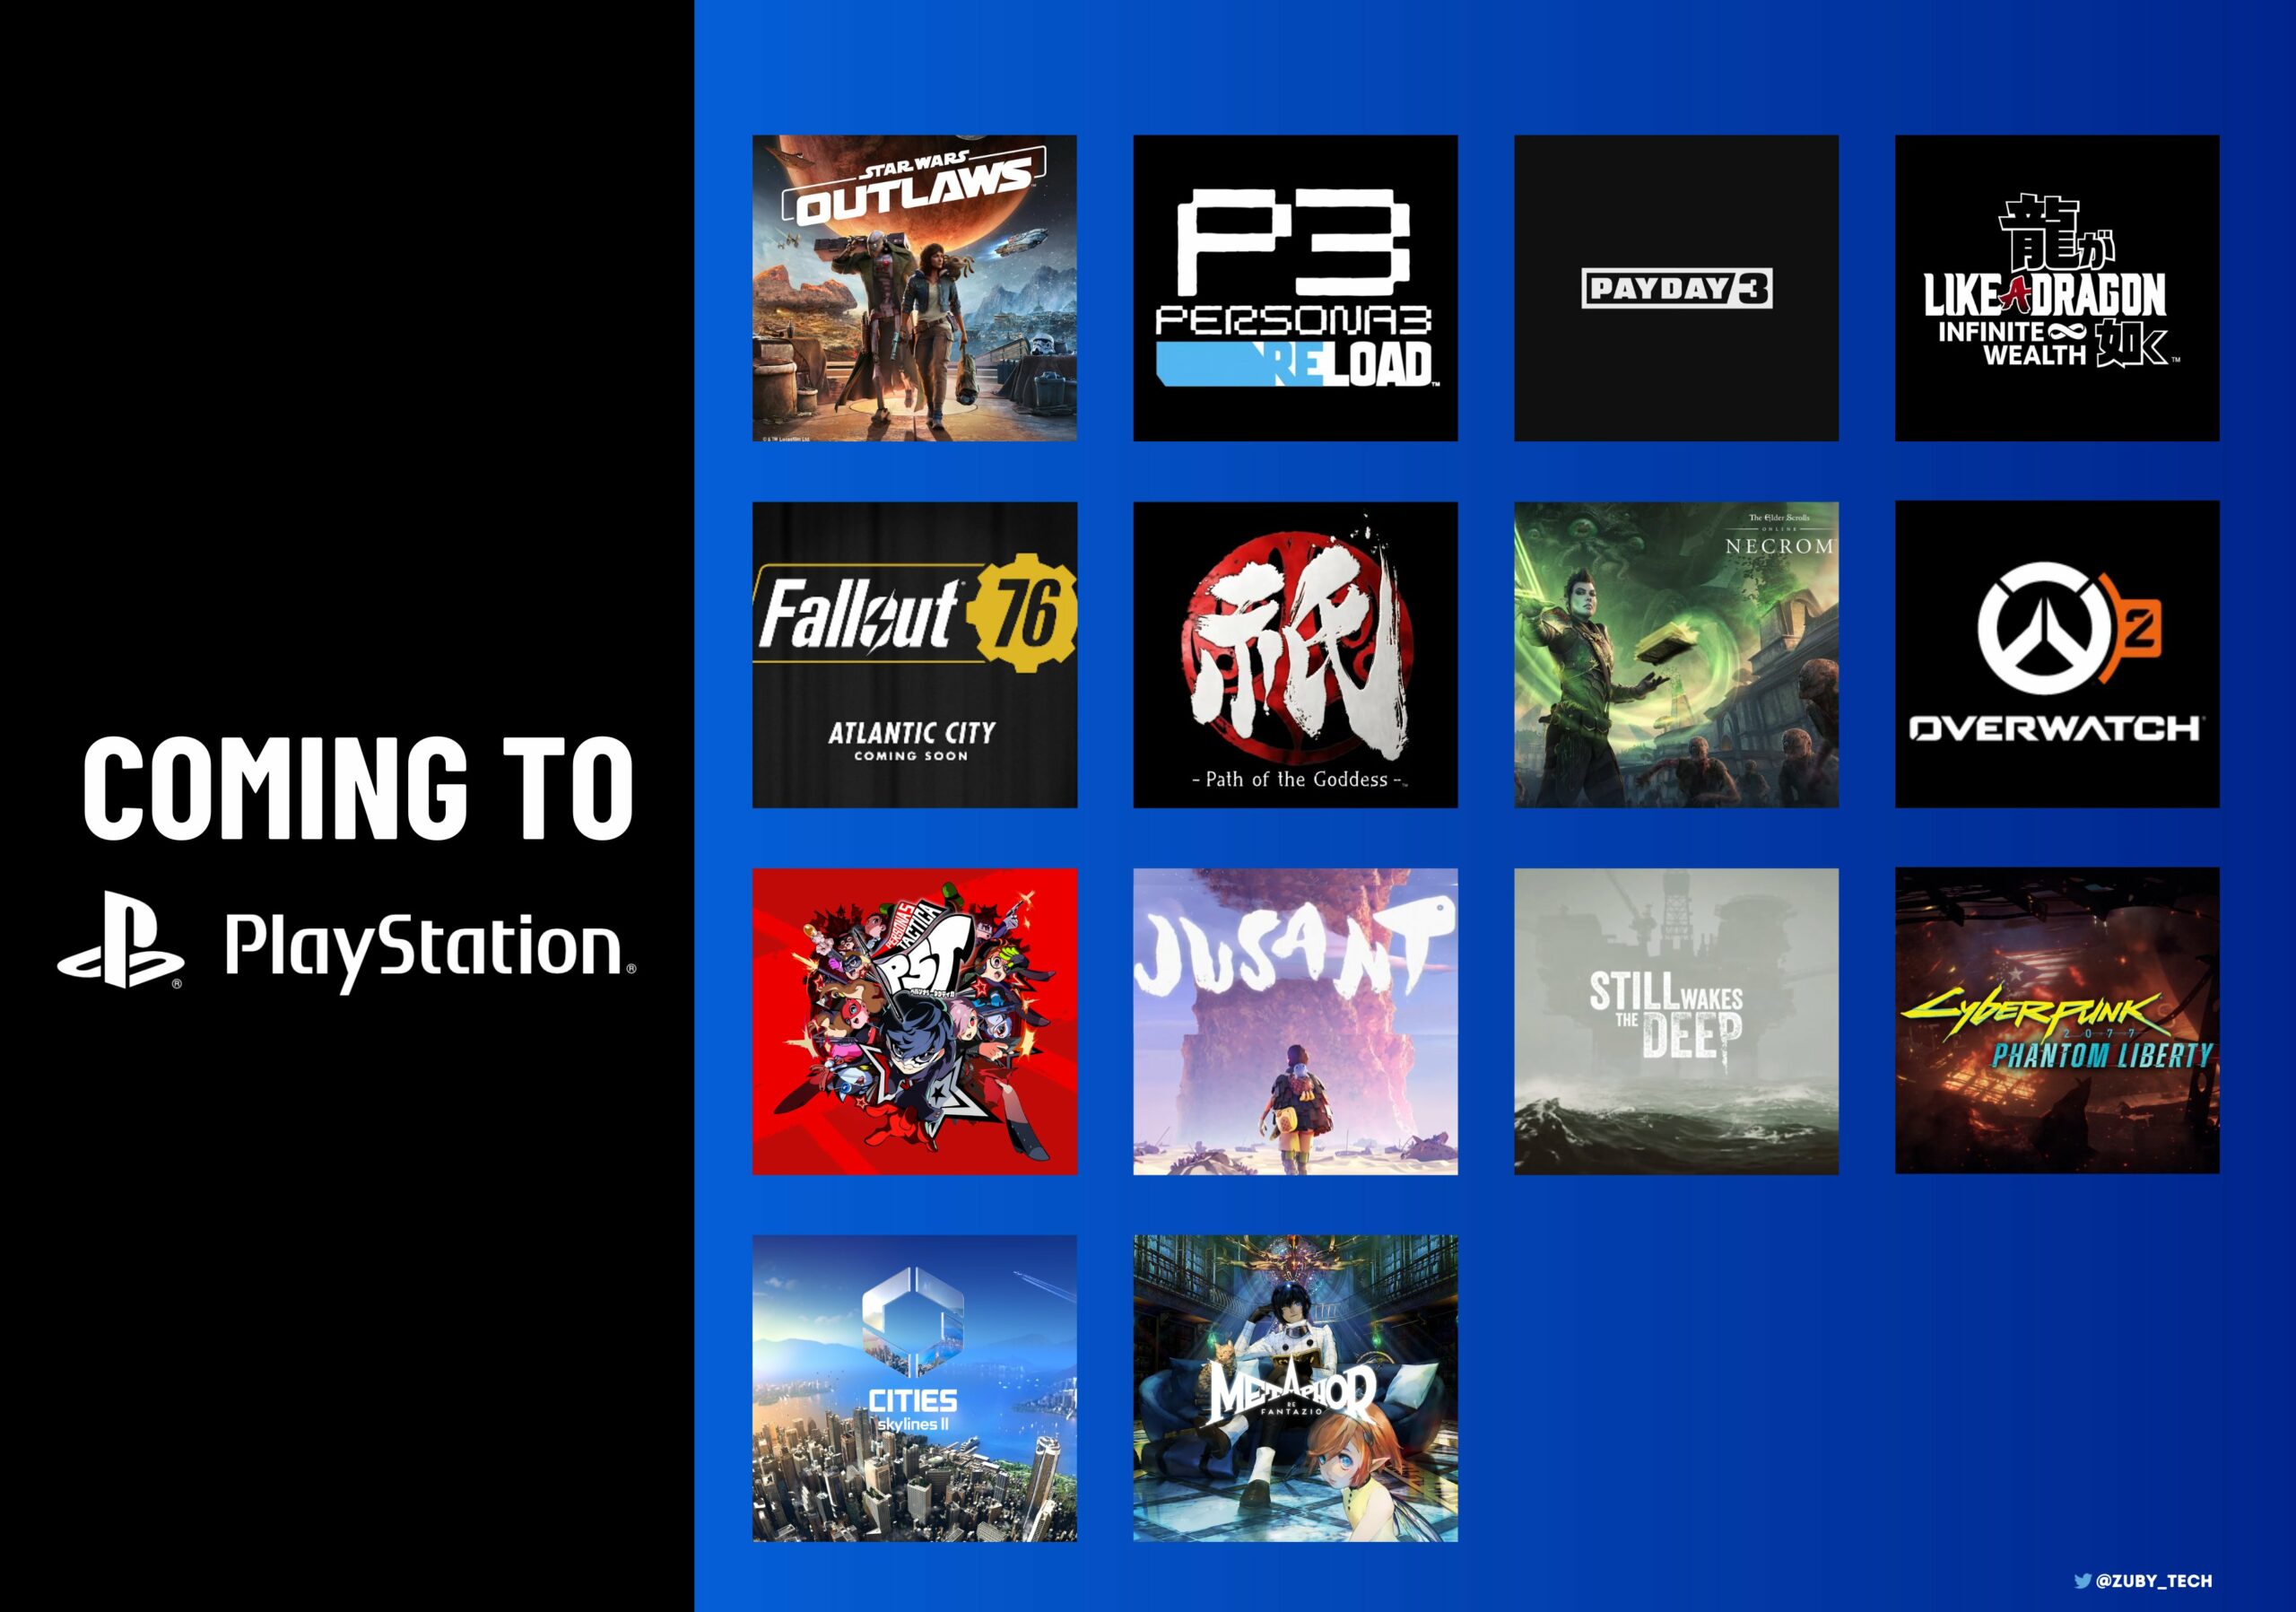 14 Of 27 Games From Xbox Showcase Also Coming To PlayStation